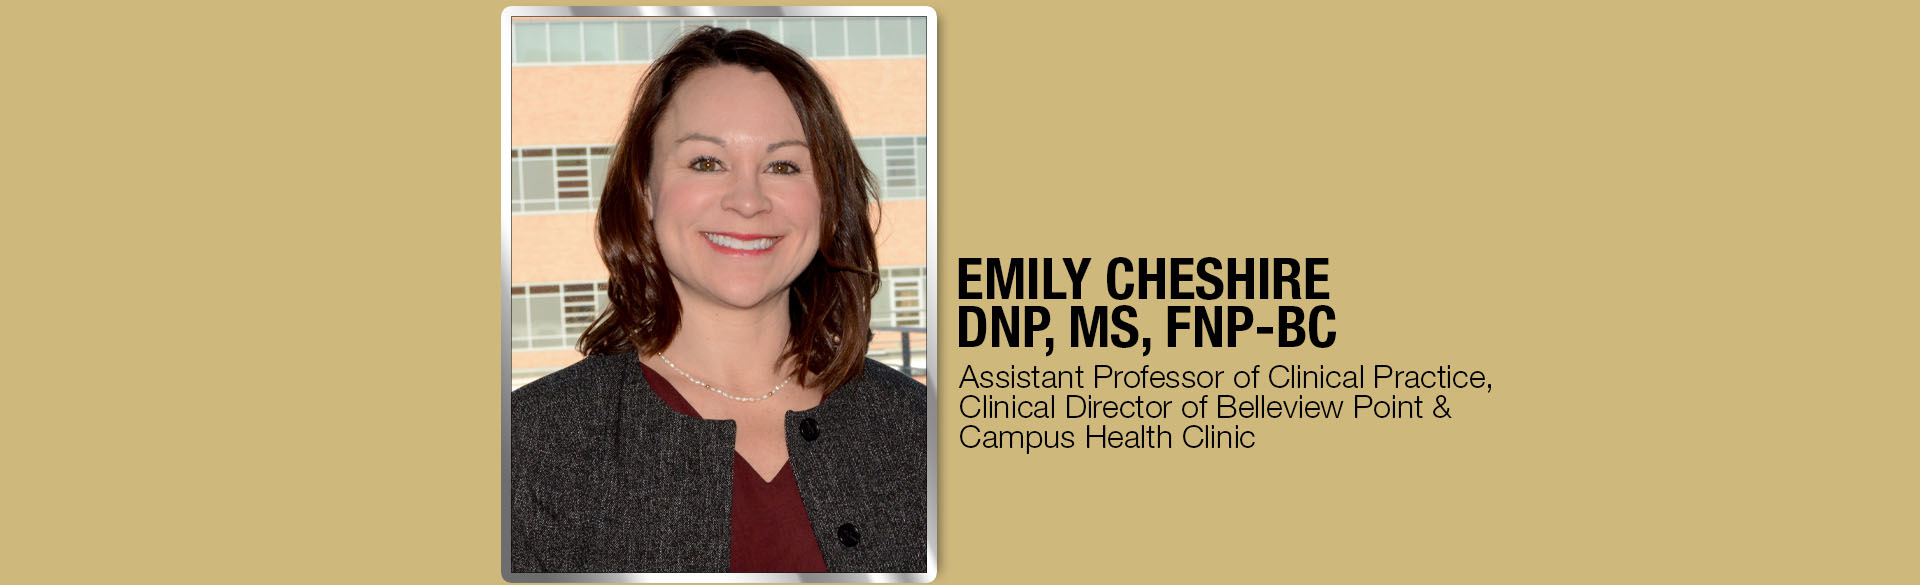  Emily Cheshire DNP, MS, FNP-BC  - Assistant Professor of Clinical Practice, Clinical Director of Belleview Point and Campus Health Clinic 